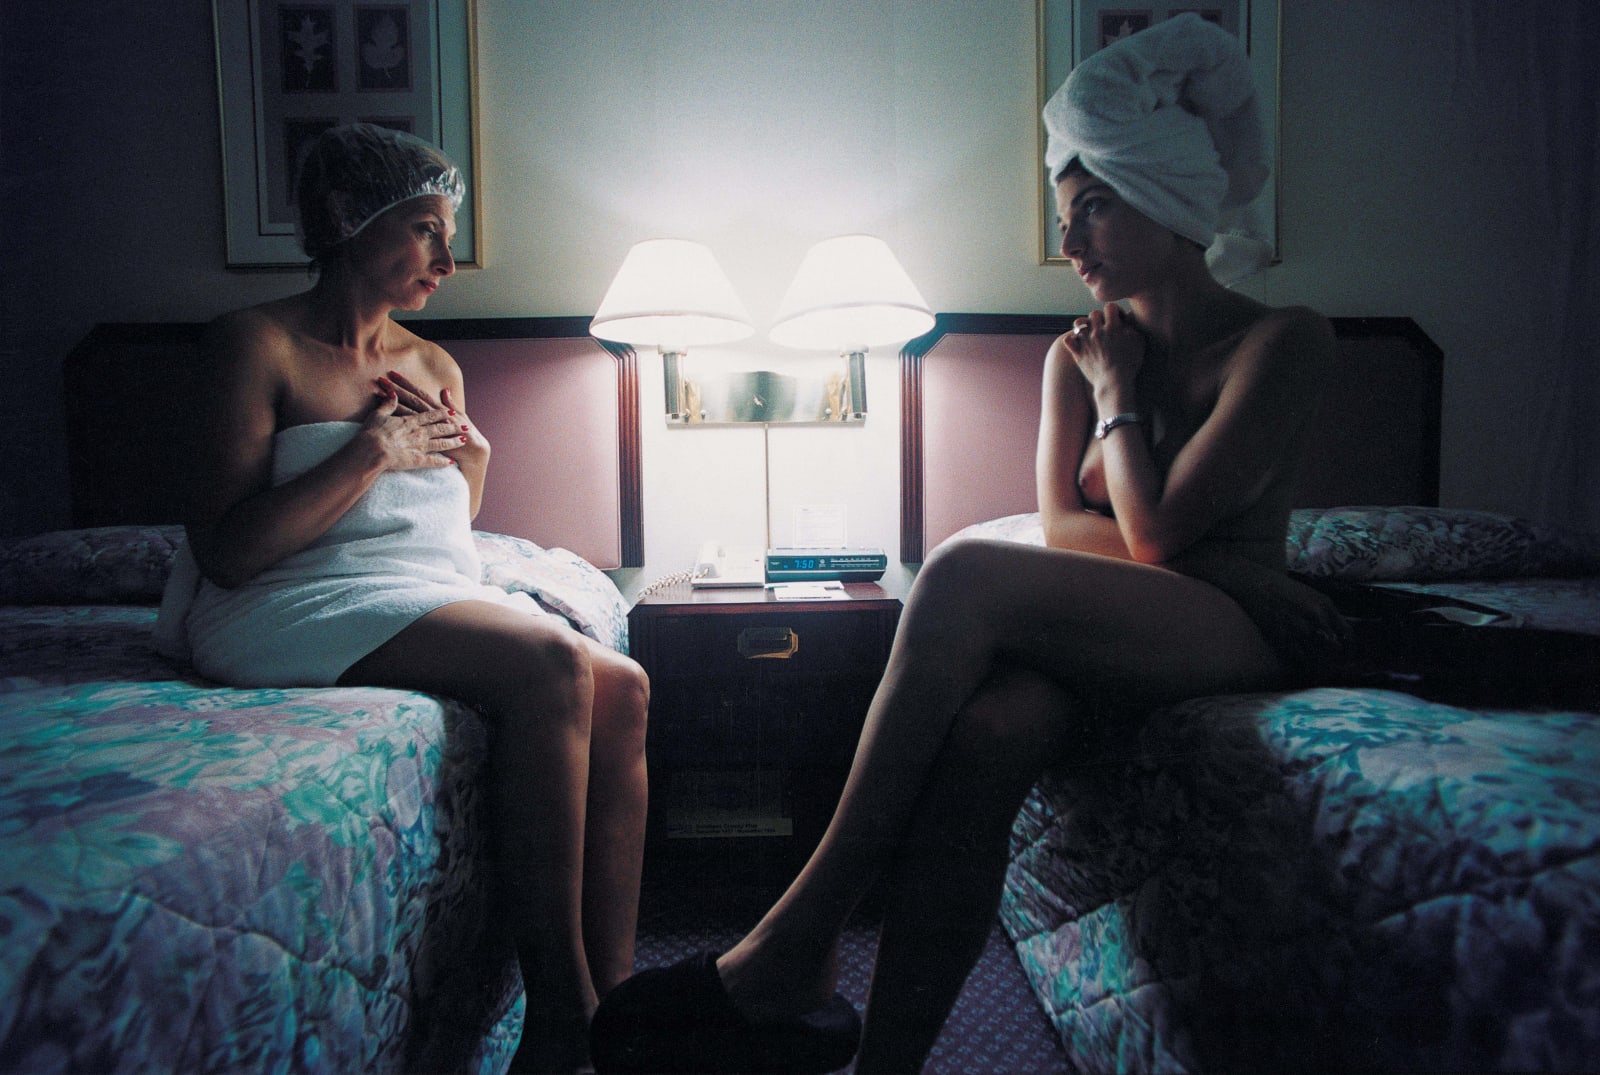 Elinor Carucci, Mother and I in hotel room, 1998